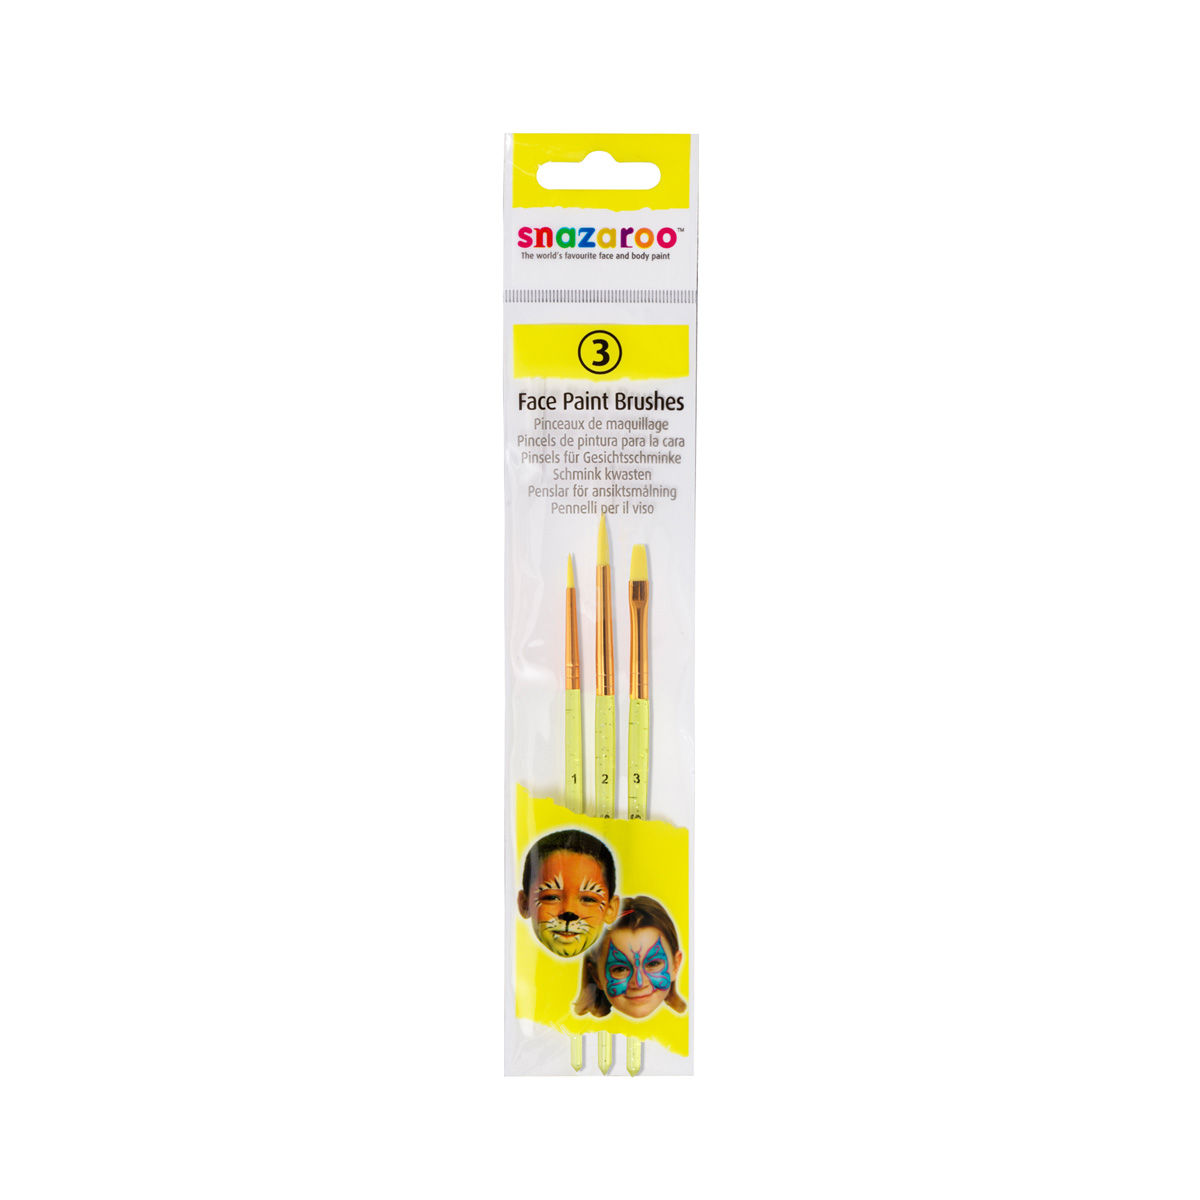 Snazaroo™ Face Paint Brushes, 3 Pieces